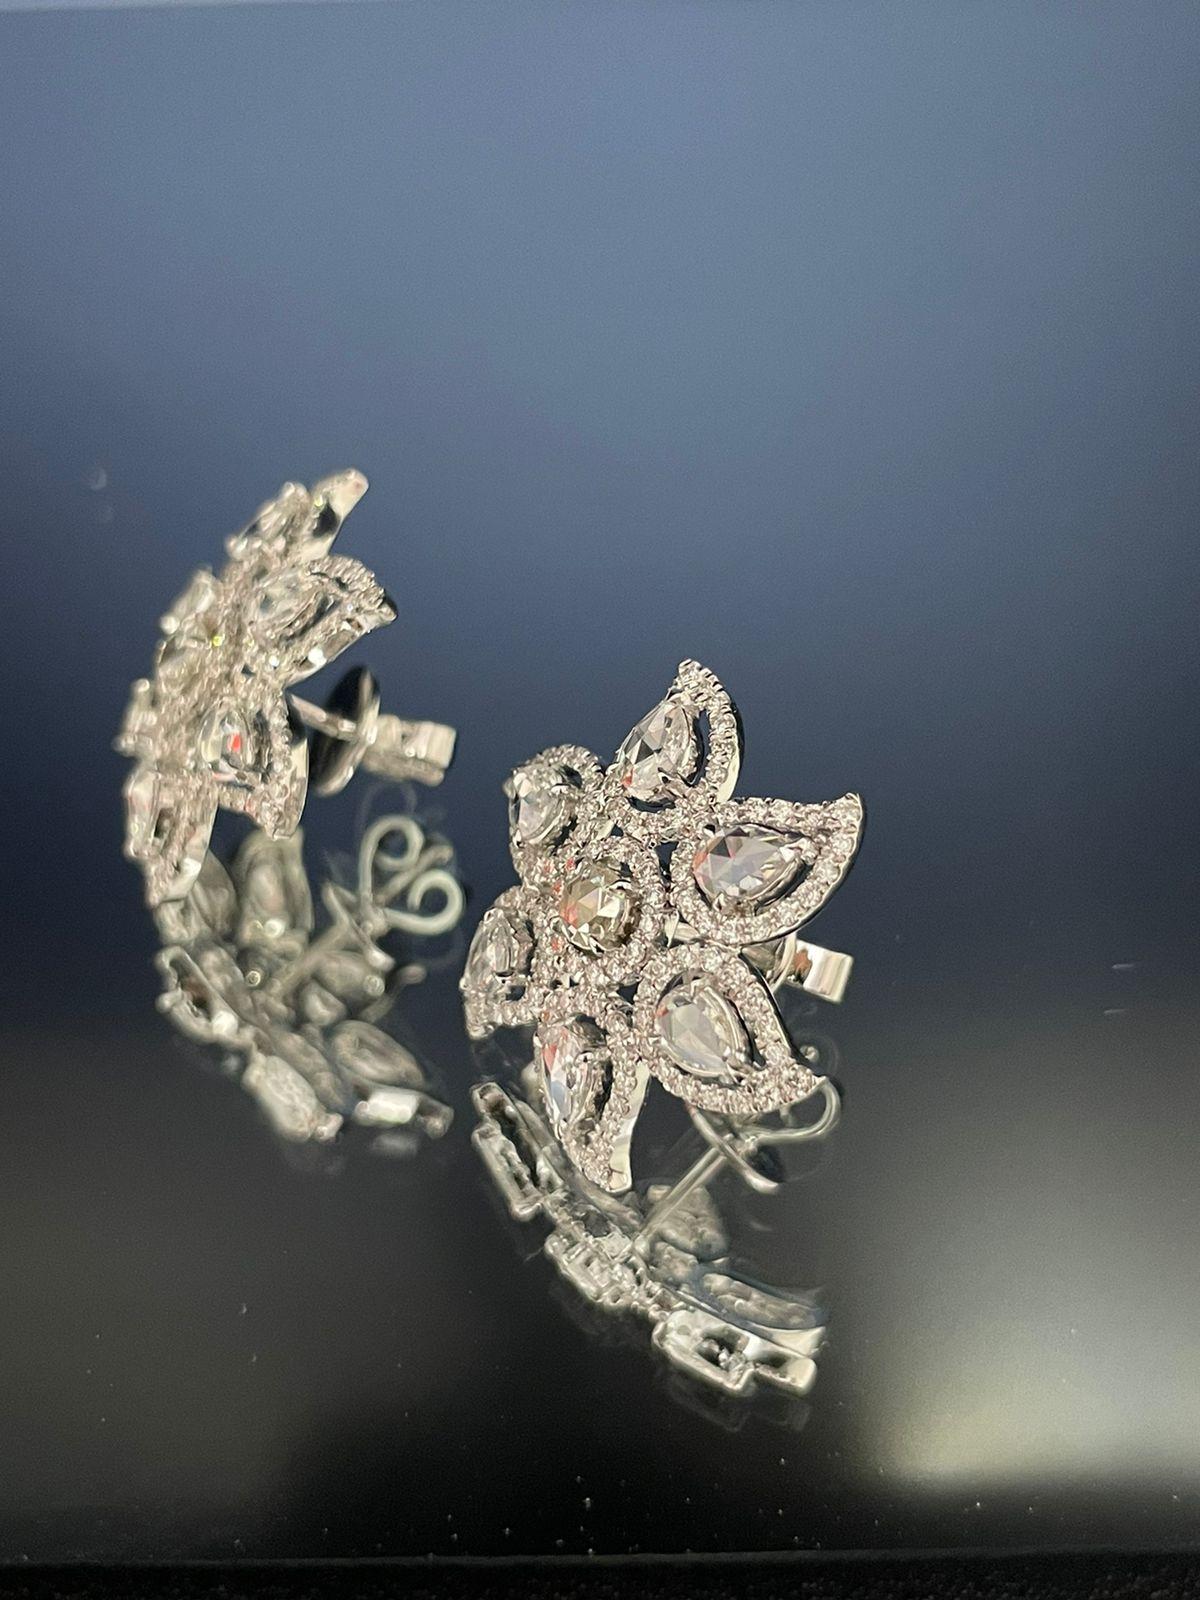 Panim  Rosecut Diamond Flower Earrings 18 Karat White Gold

These stunning fancy rosecut diamond Flower earrings are One of a kind and handmade.

They are crafted in 18kt white gold, this pair of Stud earrings features a fancy Rosecut 2.28 carat of